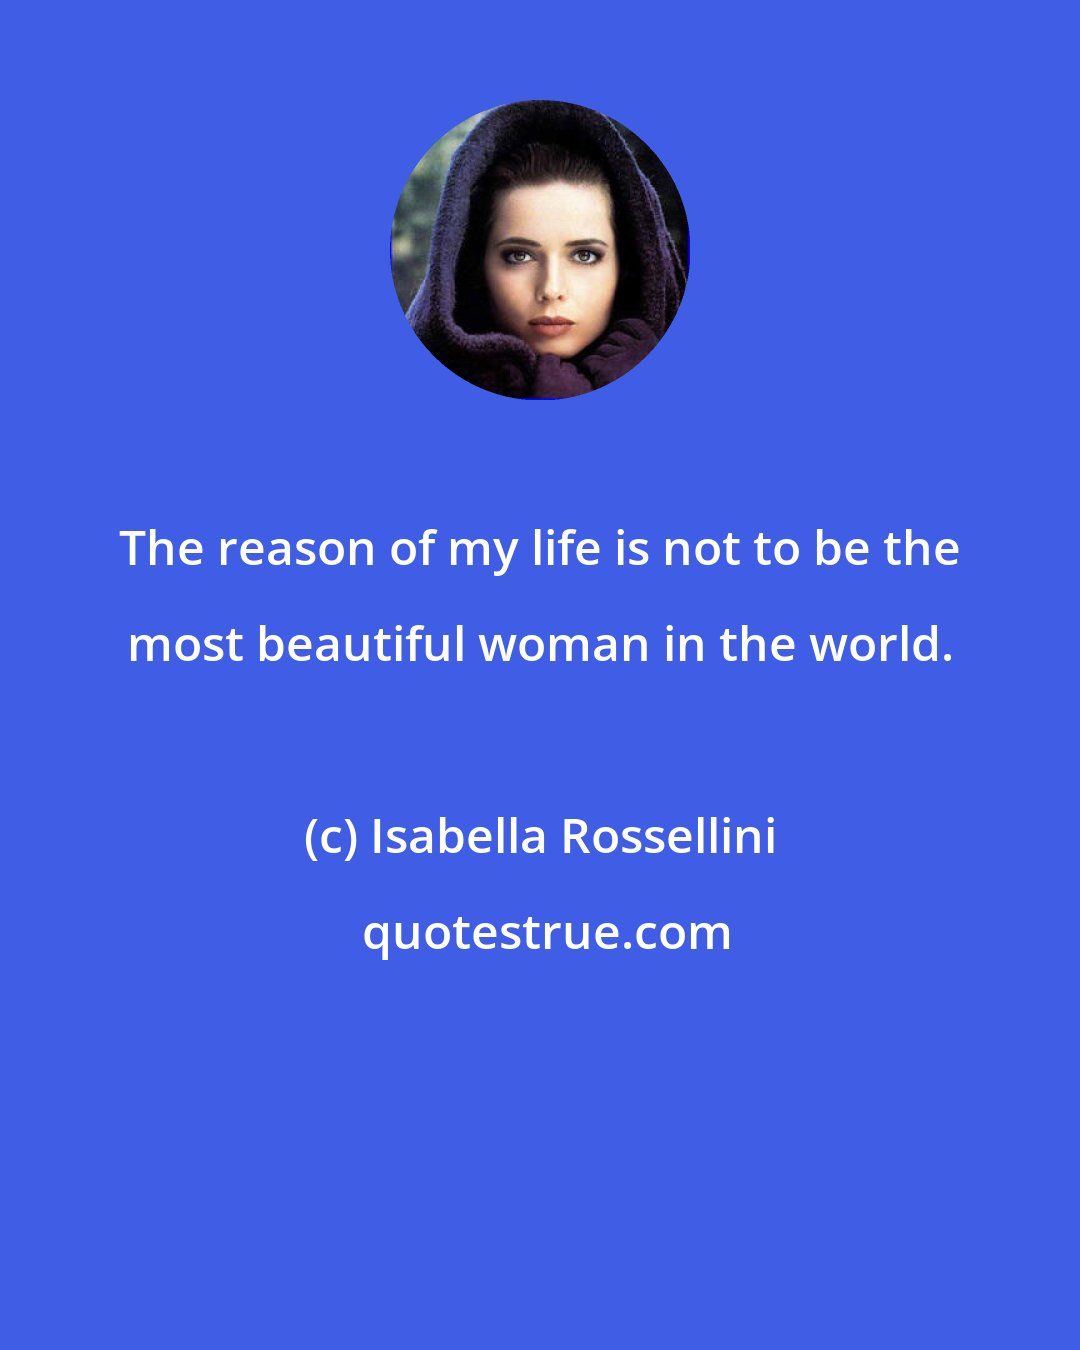 Isabella Rossellini: The reason of my life is not to be the most beautiful woman in the world.